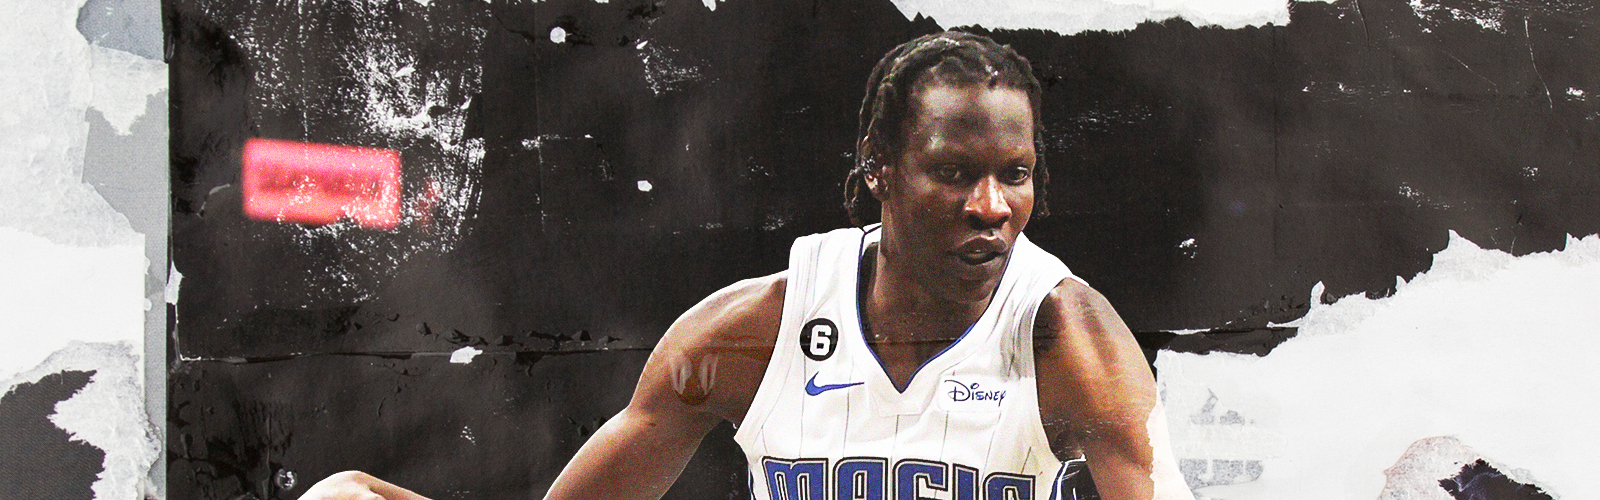 Bol Bol becomes NBA free agent after being cut Orlando Magic: The giant  capable of playing as a point guard, out of work